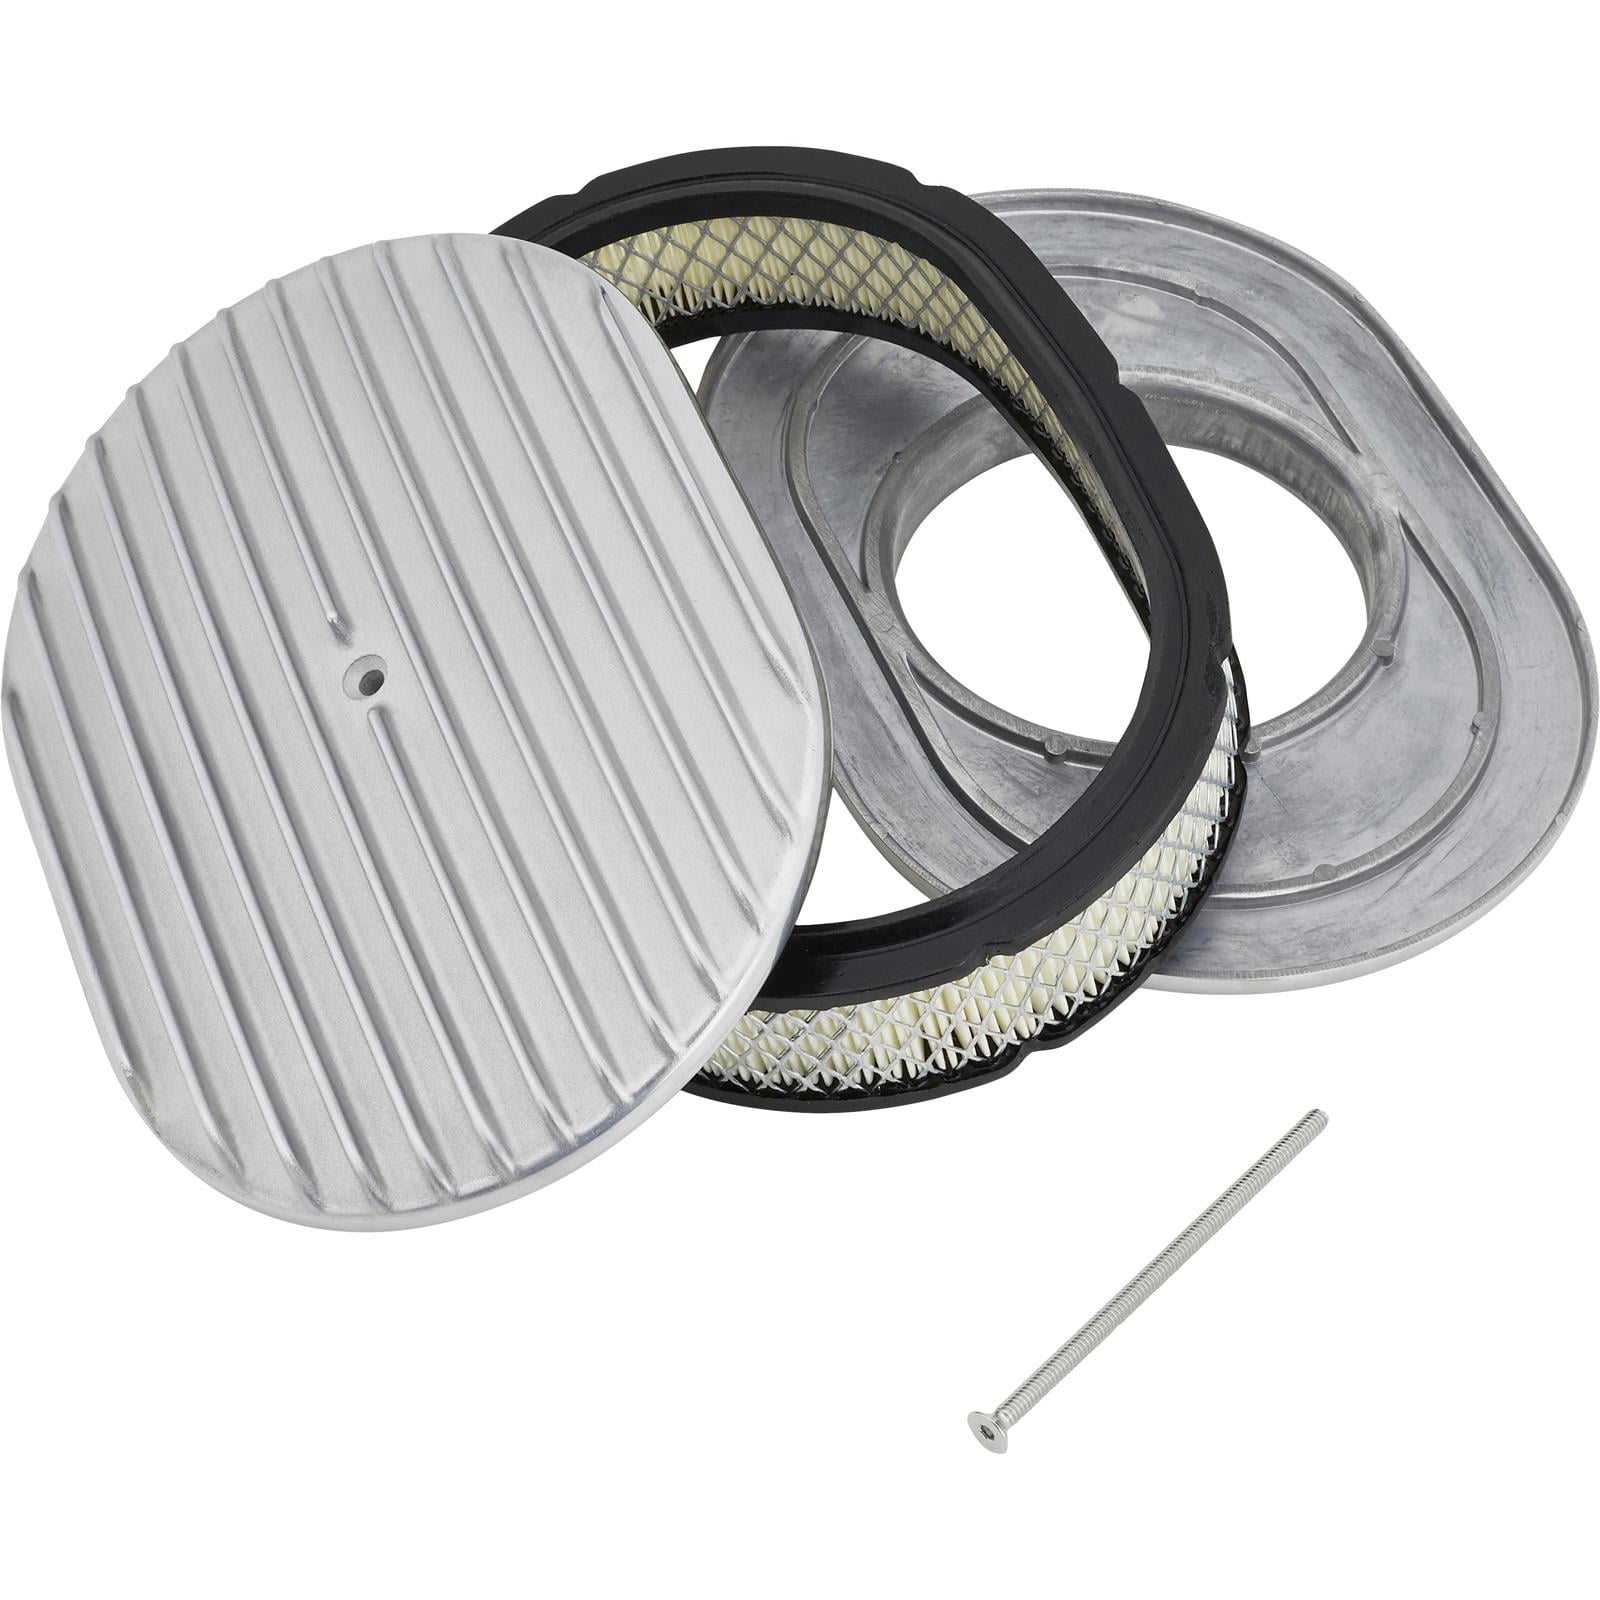 12 Polished Aluminum Finned Oval Air Cleaner Kit with Flat Base